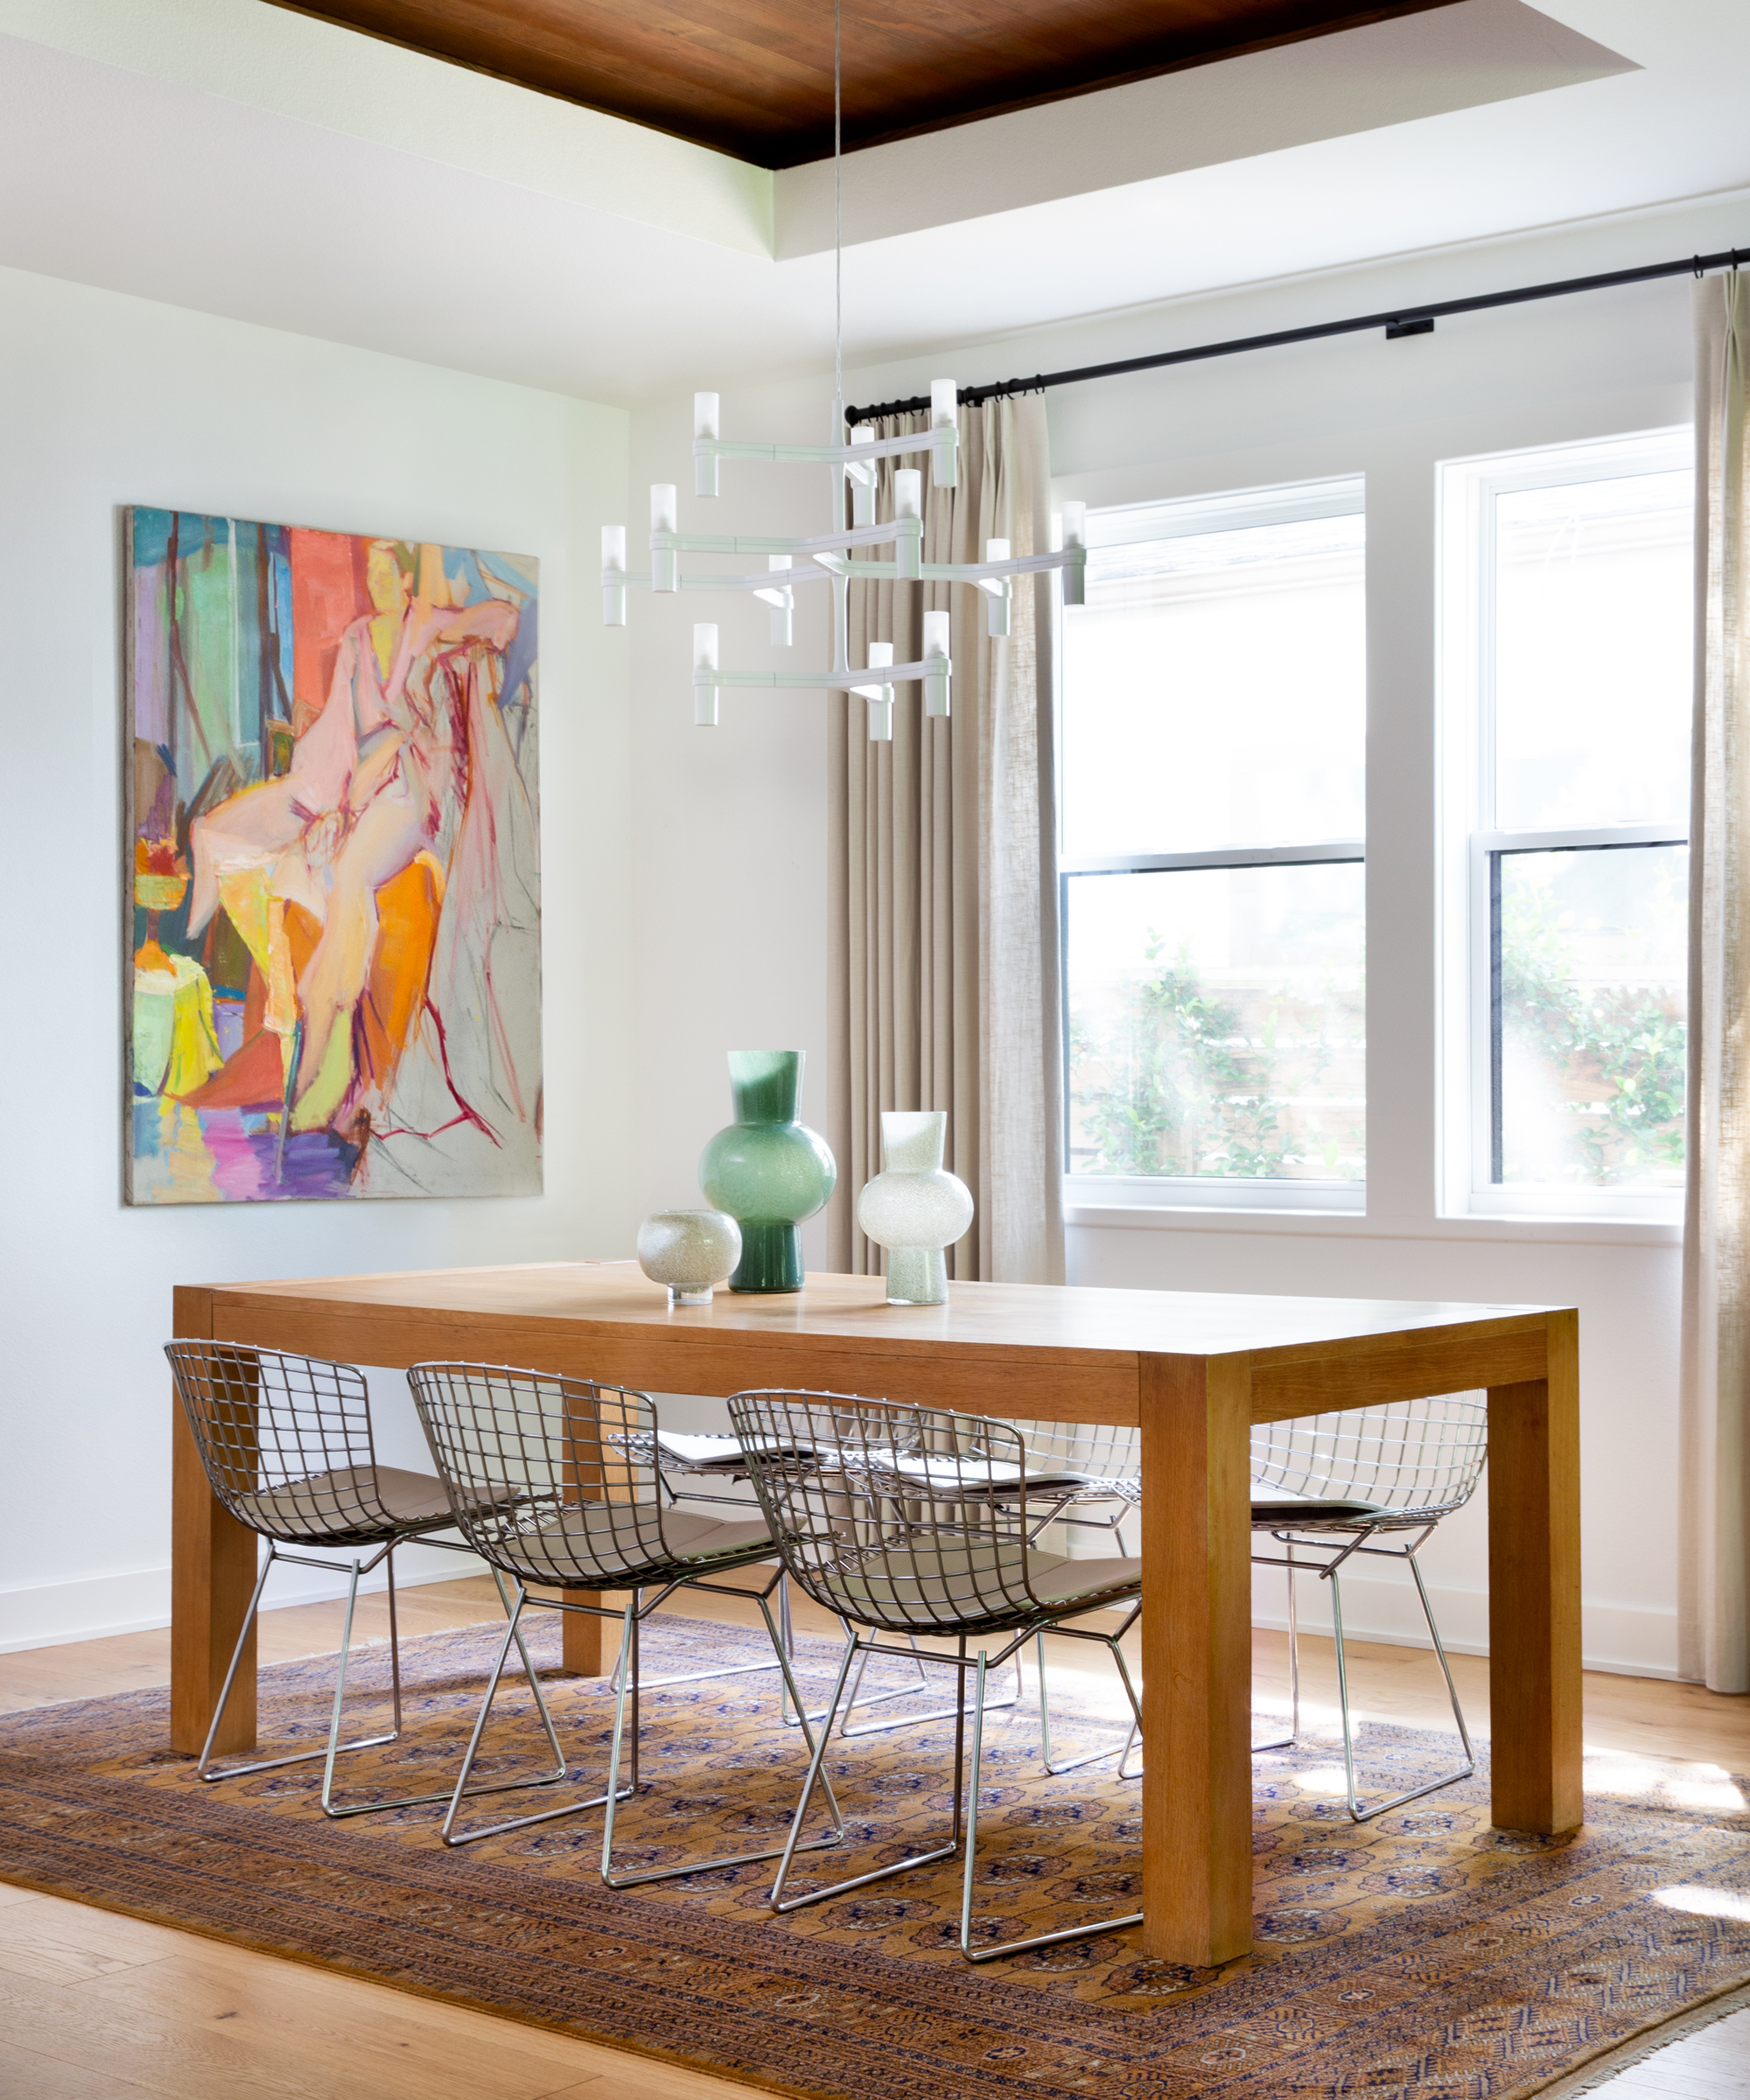 A dining room idea with a large wooden table, basket metal chairs, abstract art and a contemporary candle chandelier